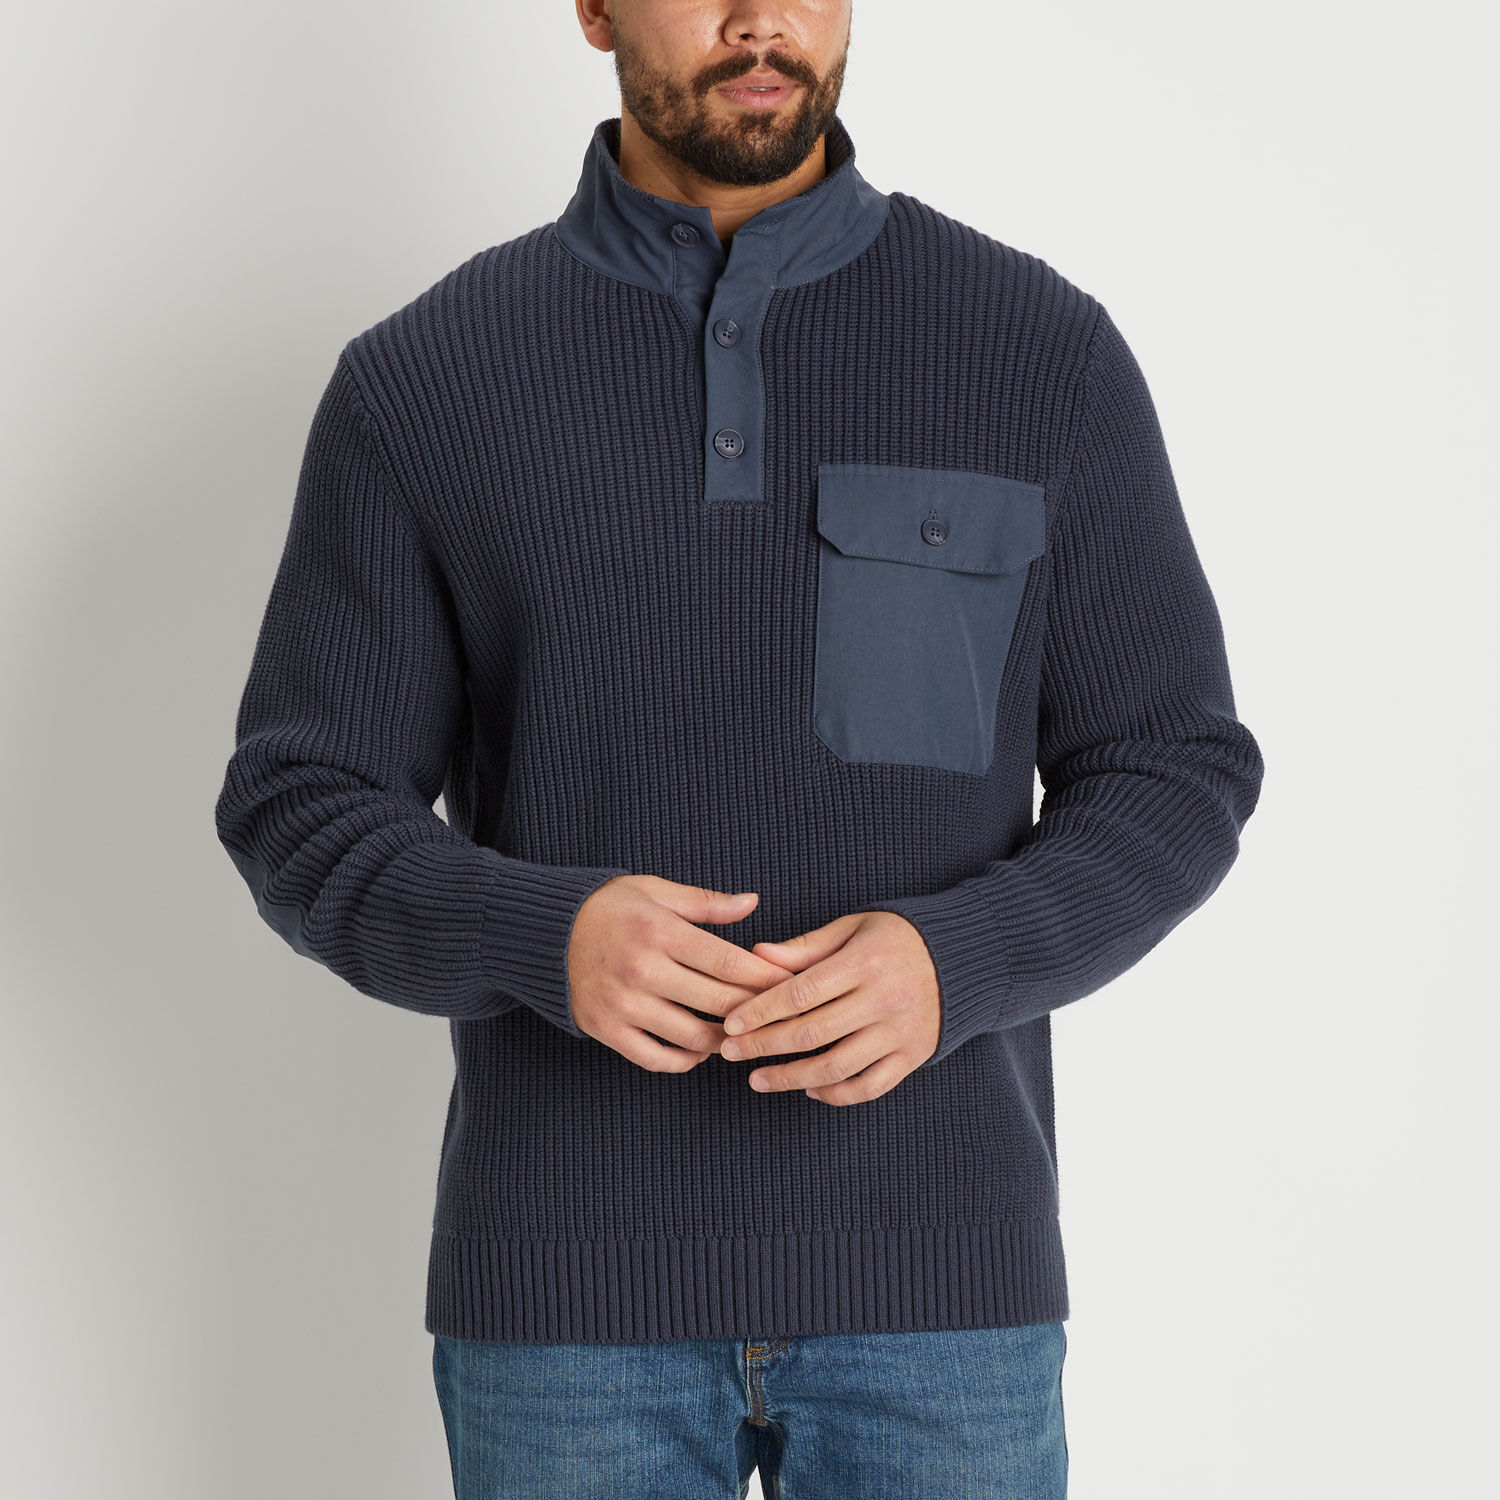 Brigadier Button Mock Sweater | Duluth Trading Company